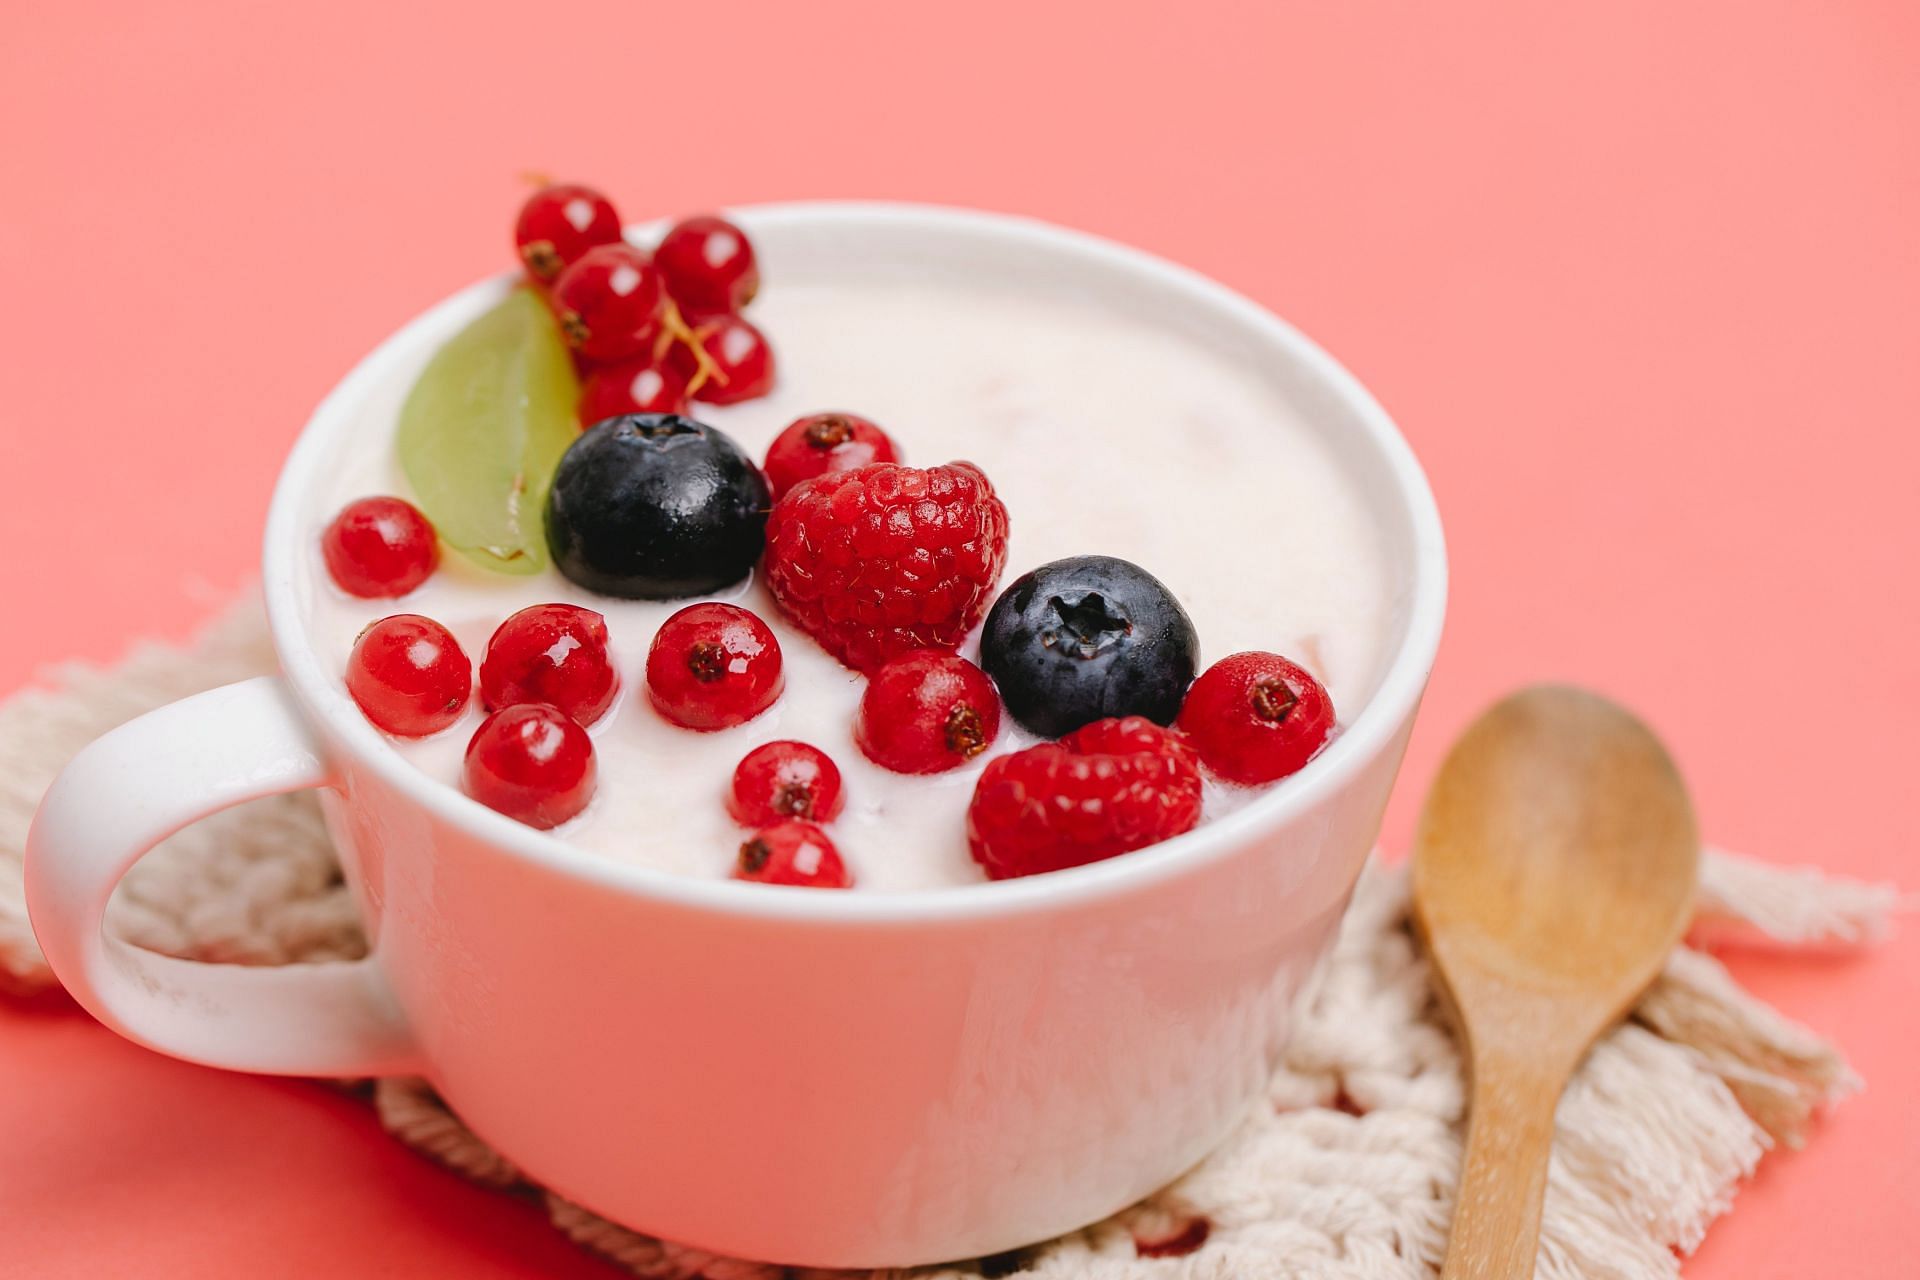 Include yogurt in your diet for weight loss (Image via pexels/Amy Lane)